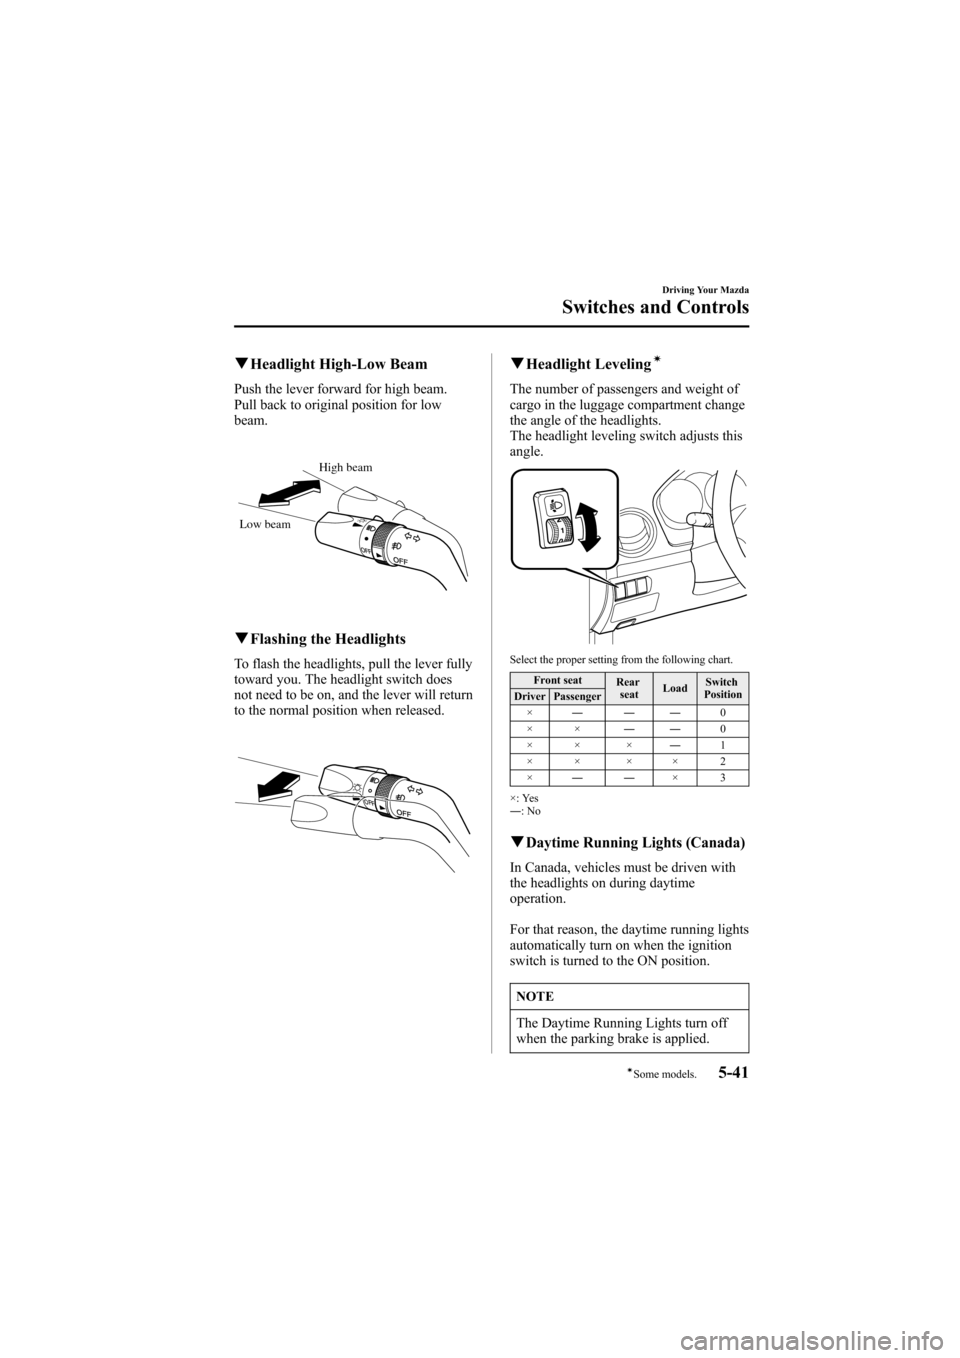 MAZDA MODEL 6 2007  Owners Manual (in English) Black plate (173,1)
qHeadlight High-Low Beam
Push the lever forward for high beam.
Pull back to original position for low
beam.
High beam
Low beam
qFlashing the Headlights
To flash the headlights, pul